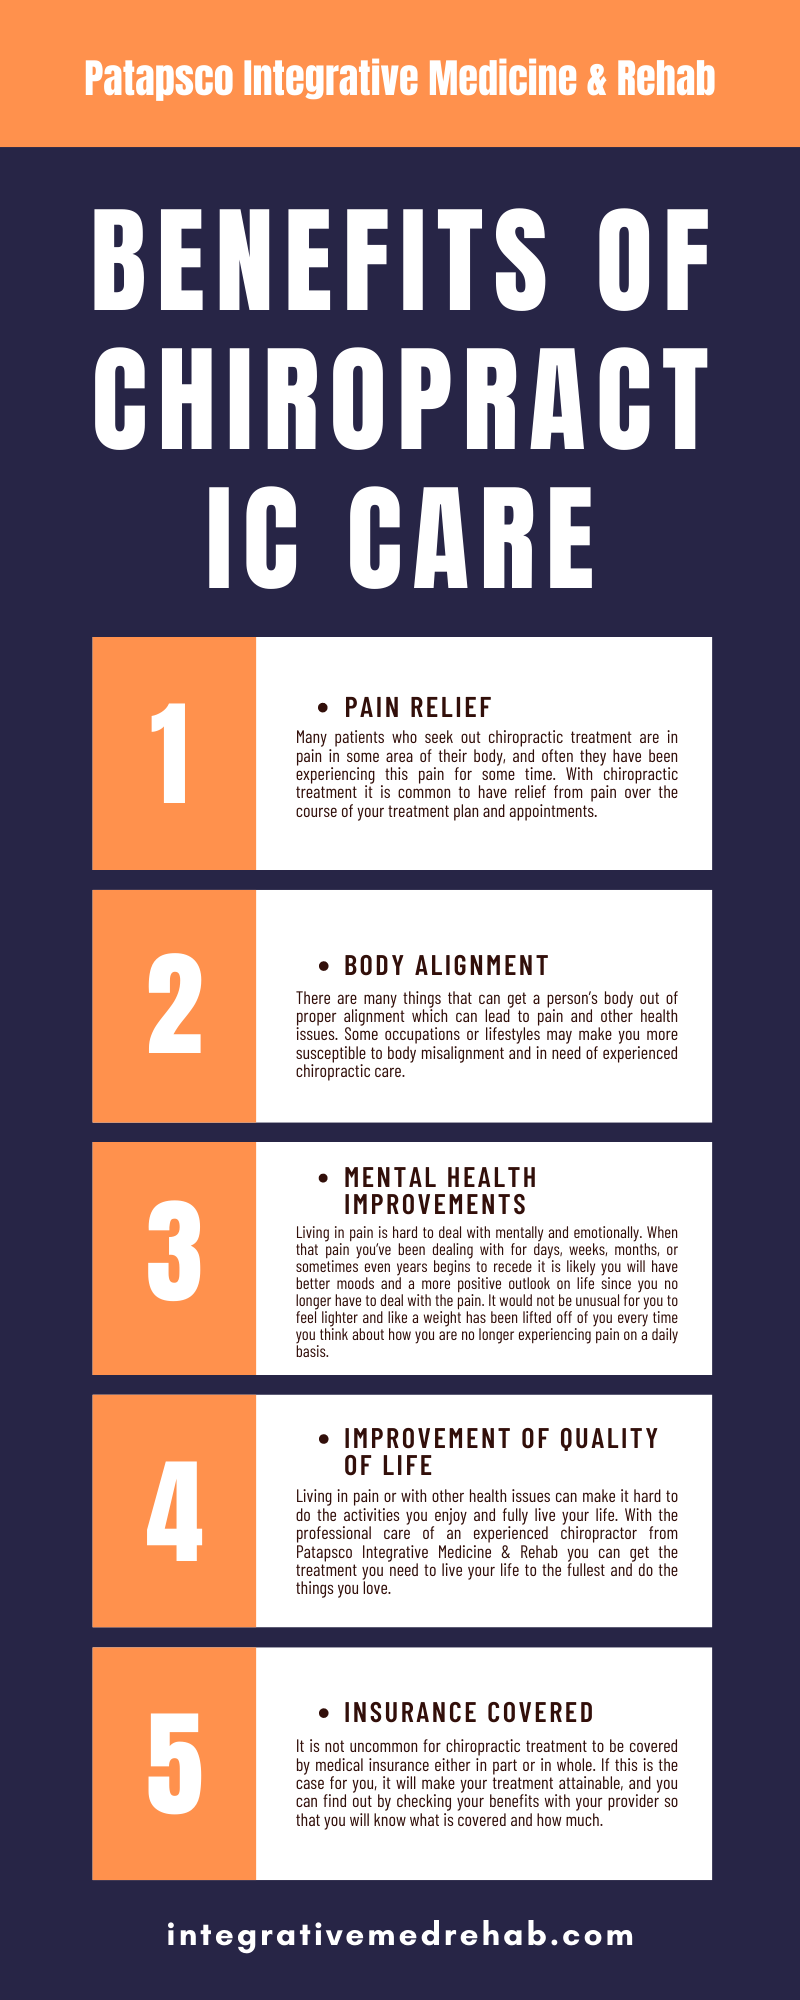 BENEFITS OF CHIROPRACTIC CARE INFOGRAPHIC